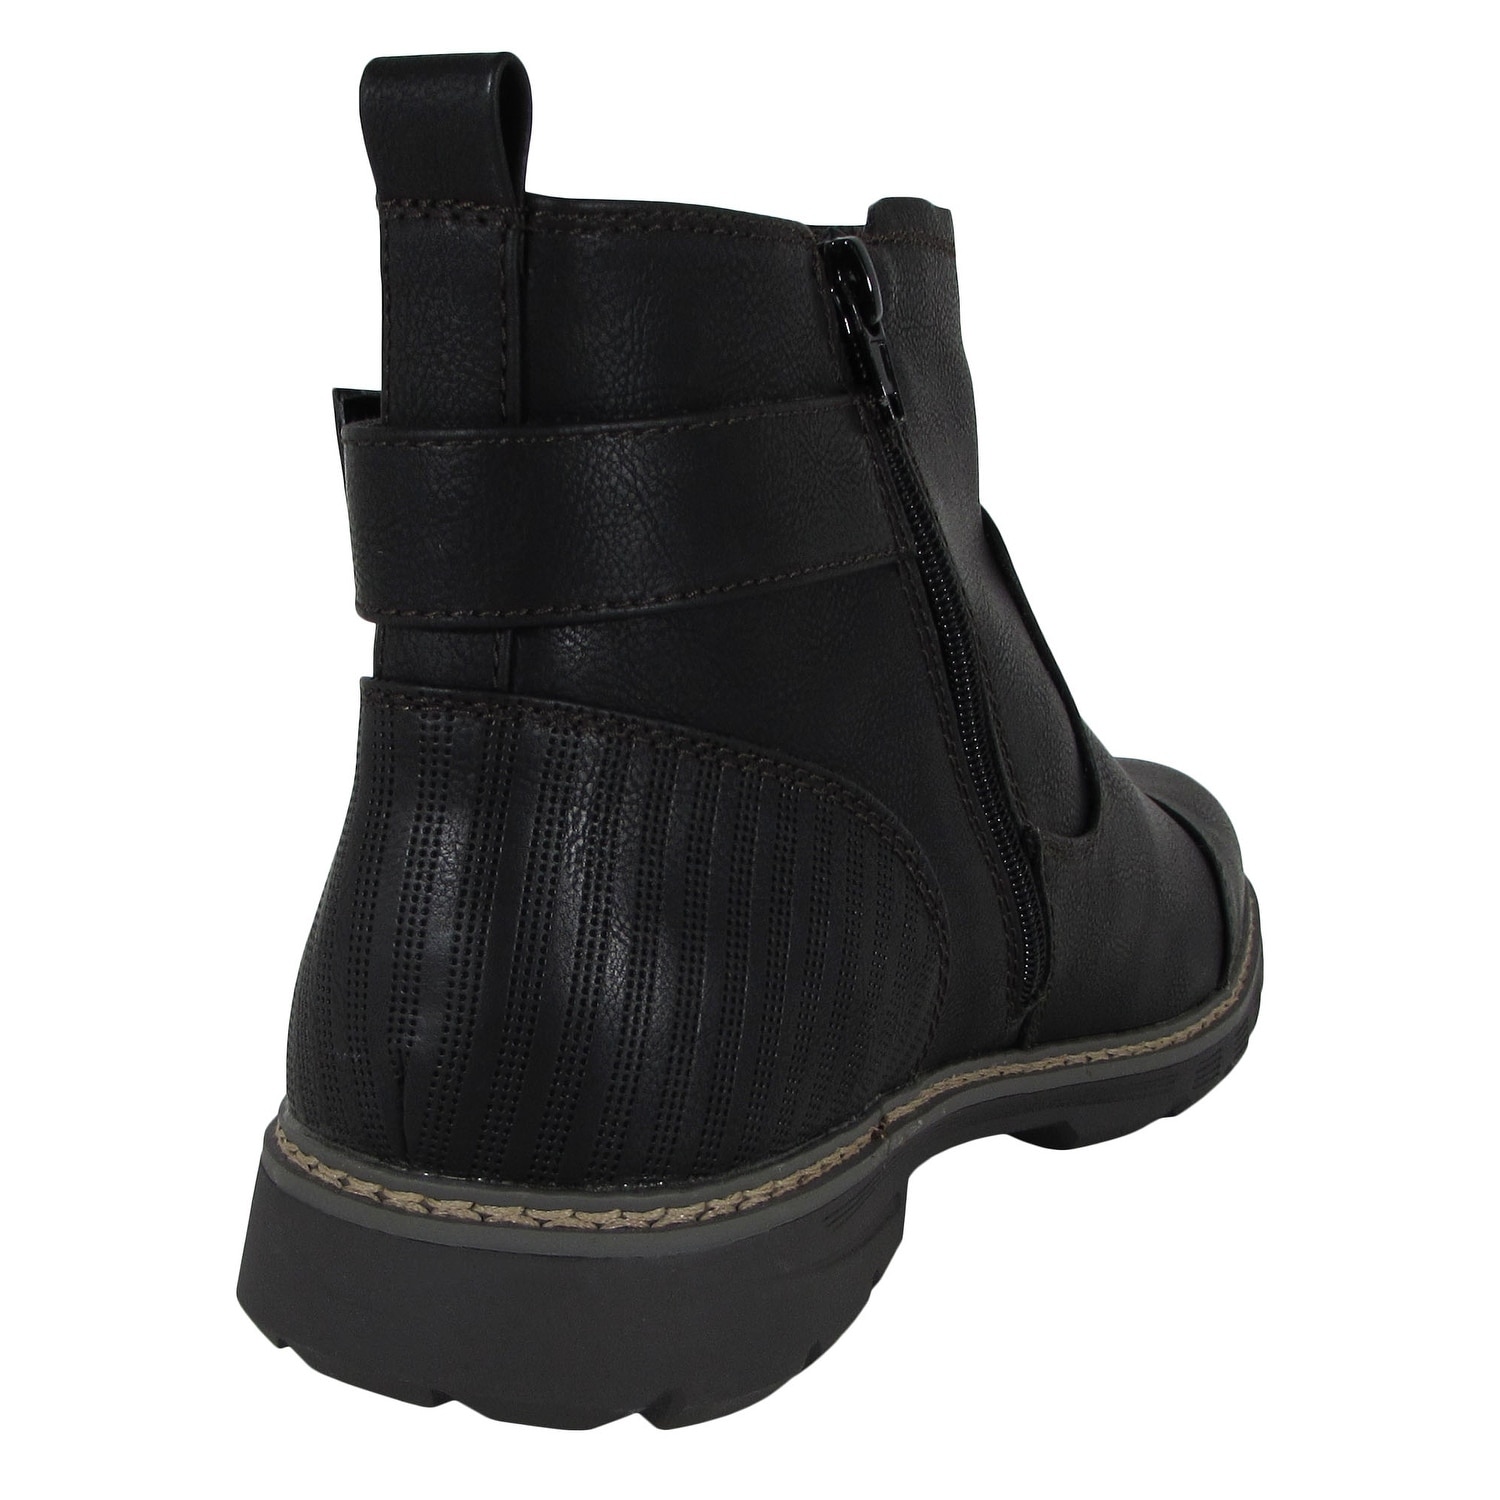 Day Five Mens Casual Zip Up Chelsea Boot Shoes, Black, US 10 - image 4 of 4